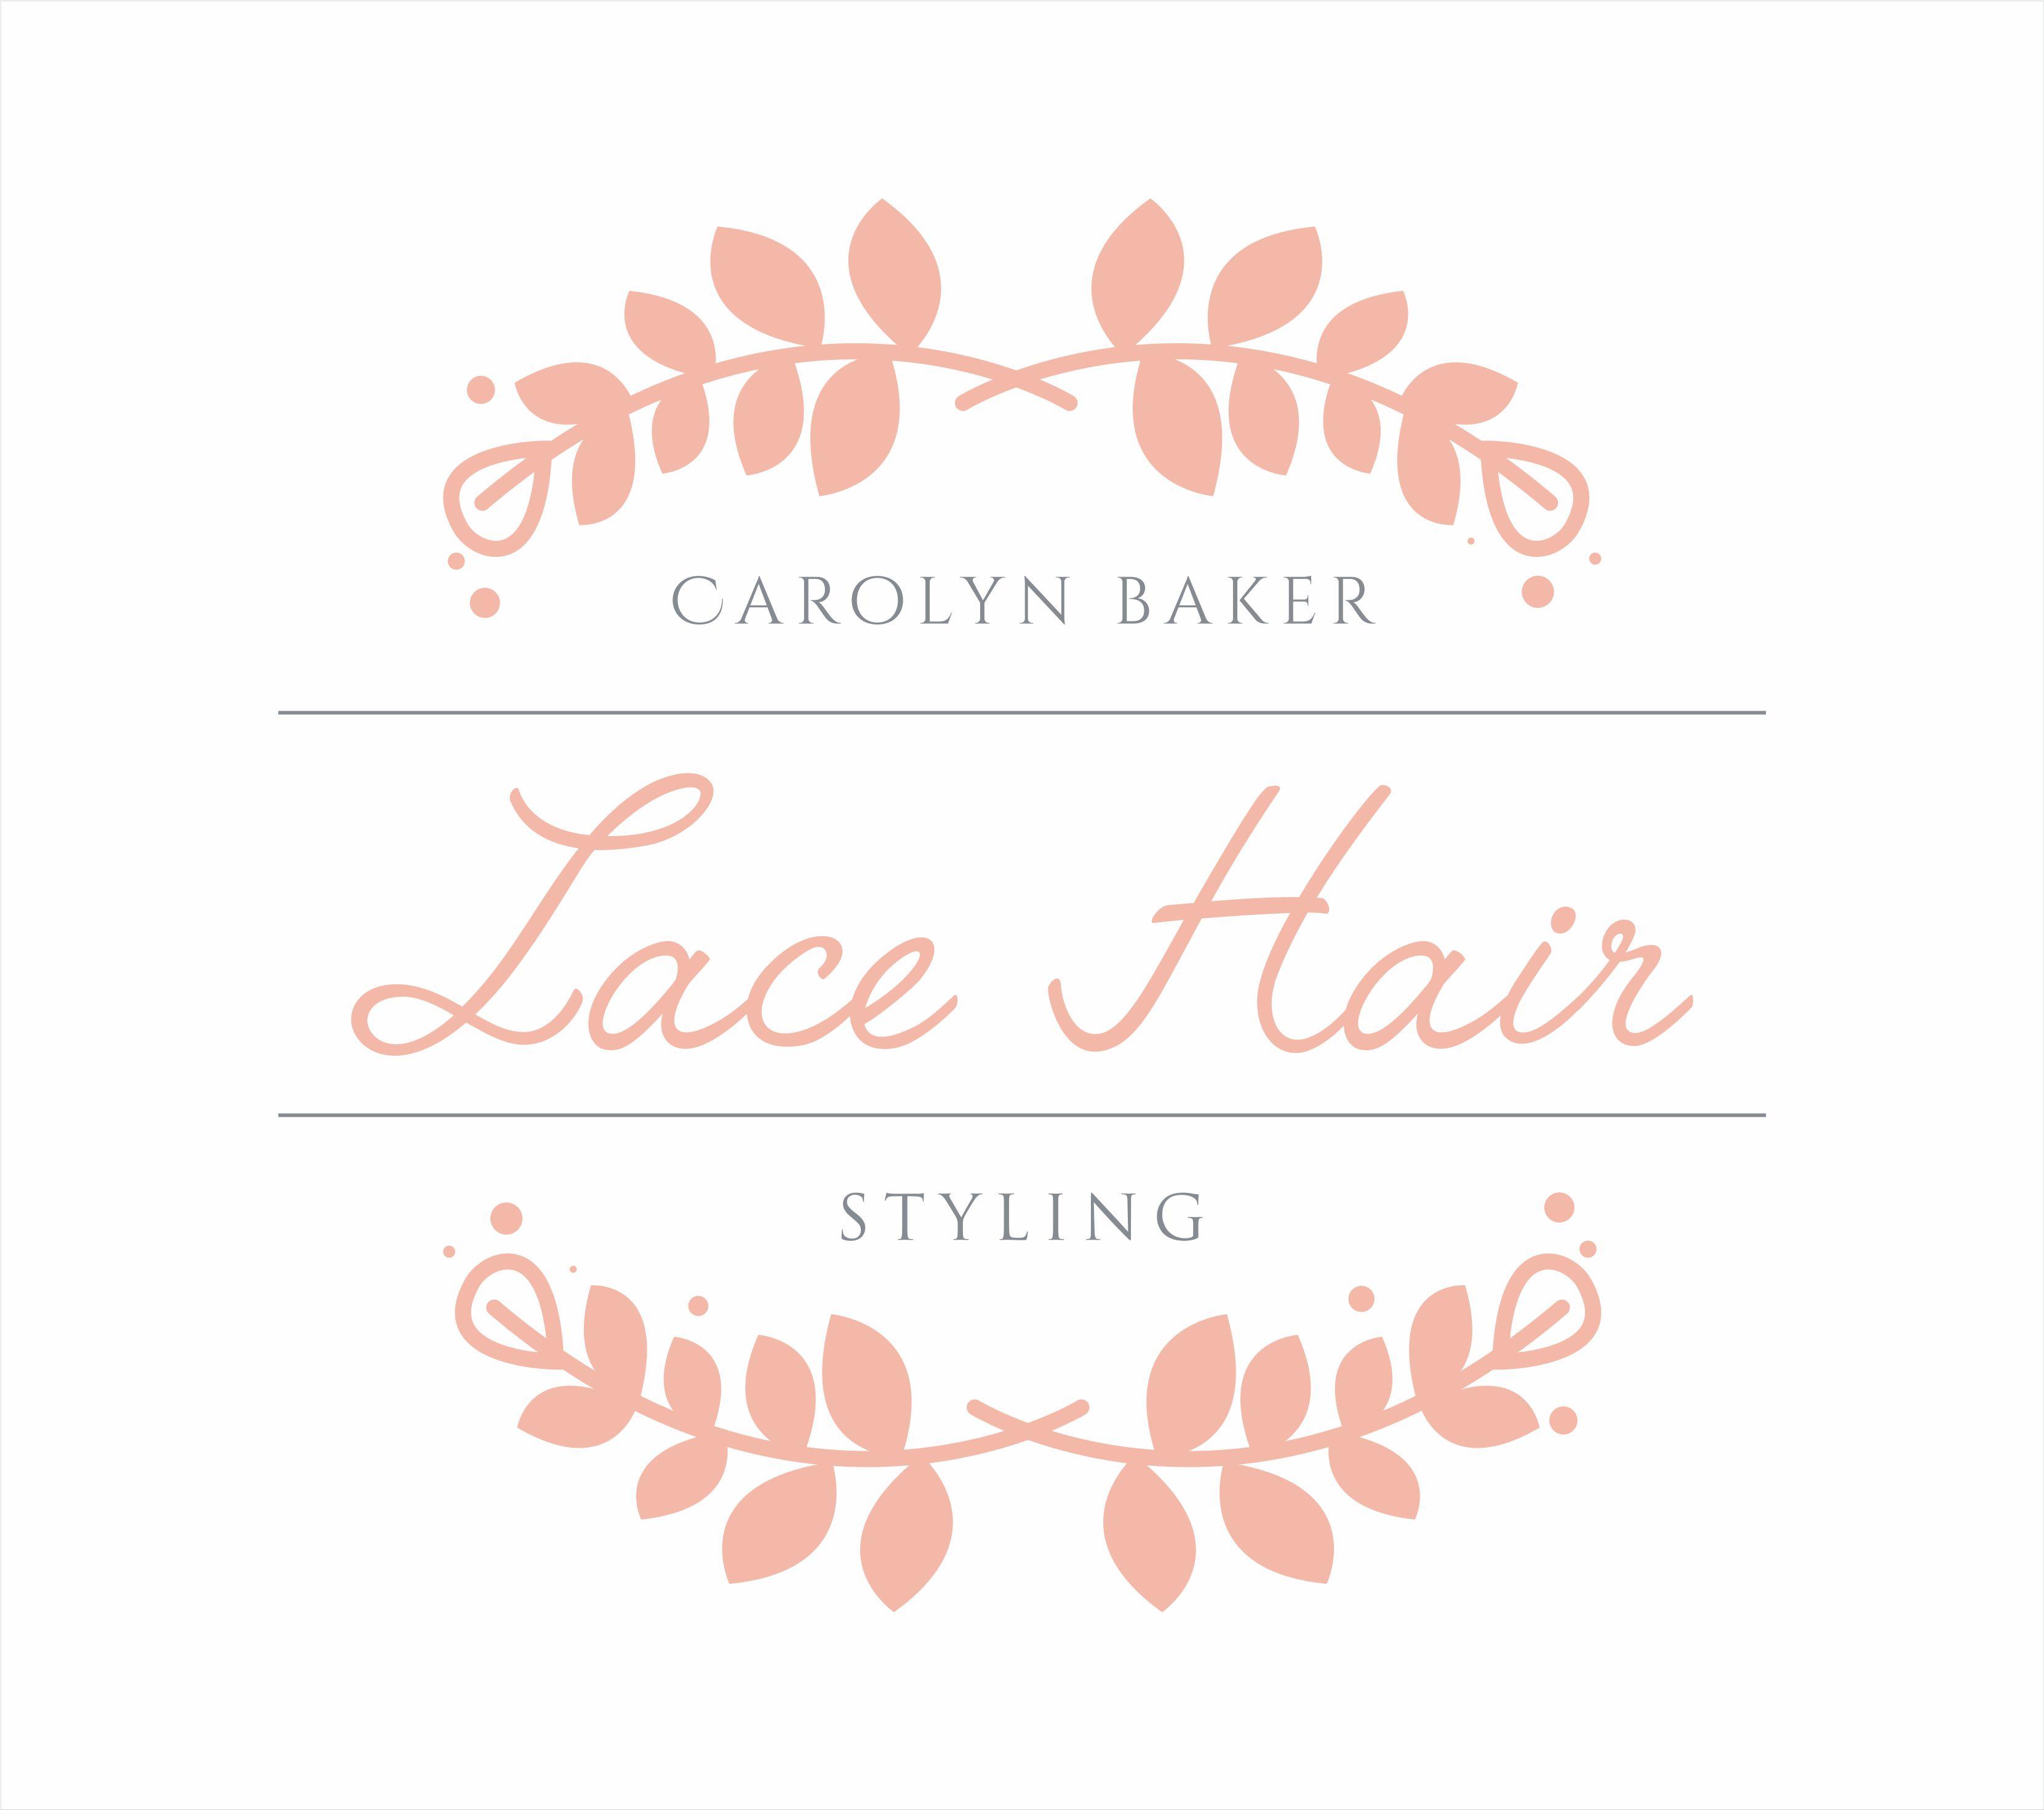 Lace Hair Styling